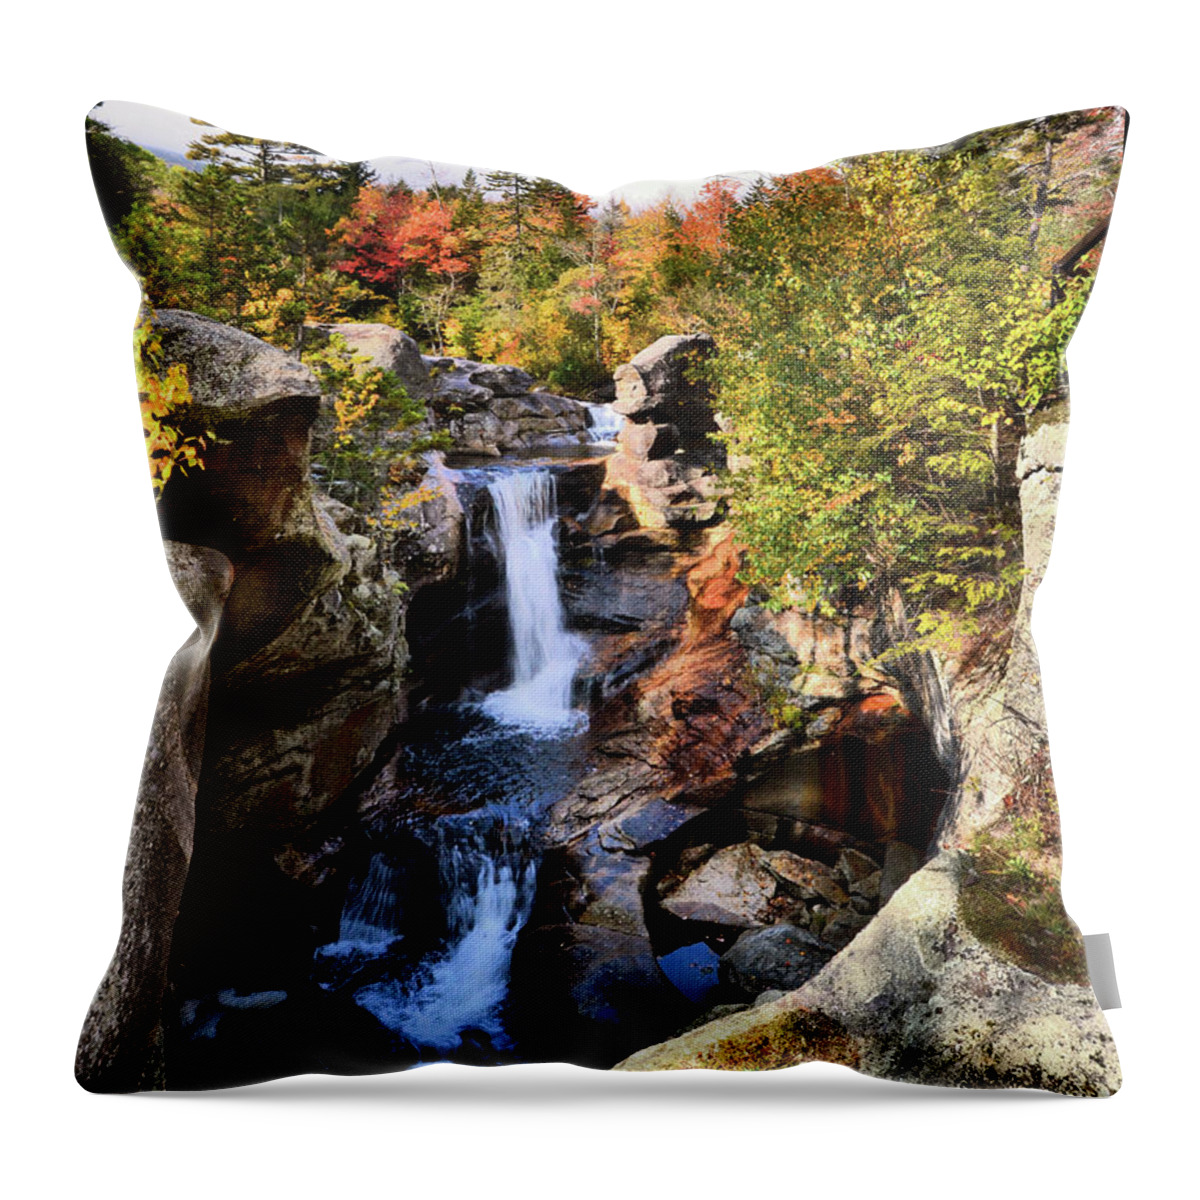 Screw Auger Falls Throw Pillow featuring the photograph Screw Auger Falls by Colleen Phaedra